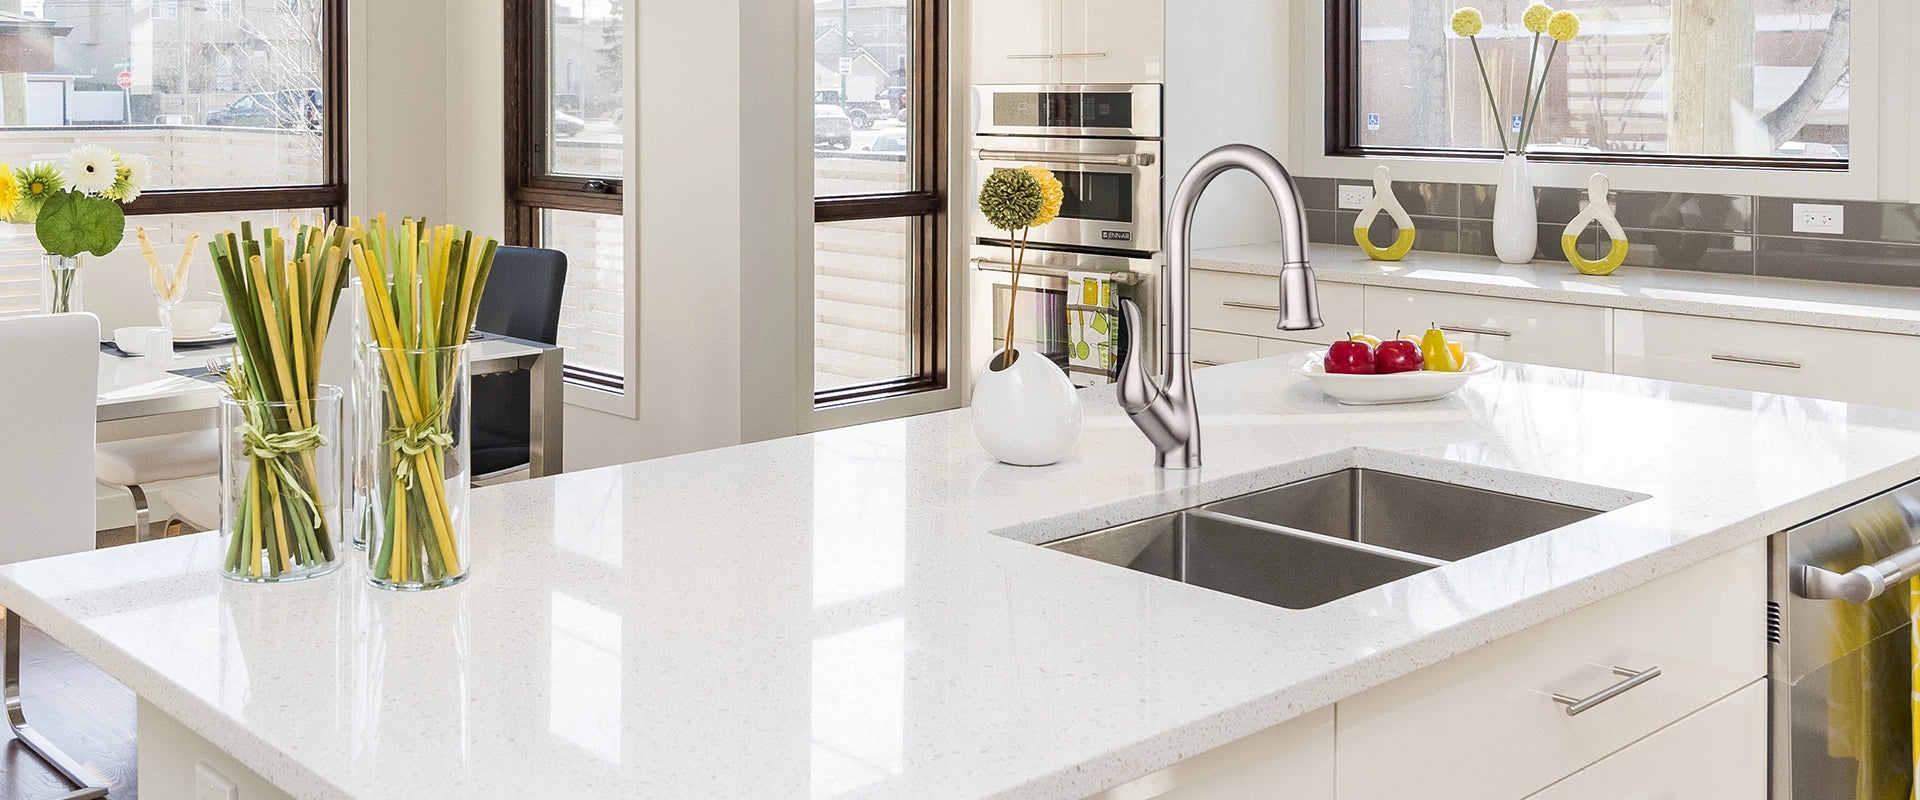 An elegant faucet is installed above a double bowl kitchen sink, complemented by attractive white granite marble.